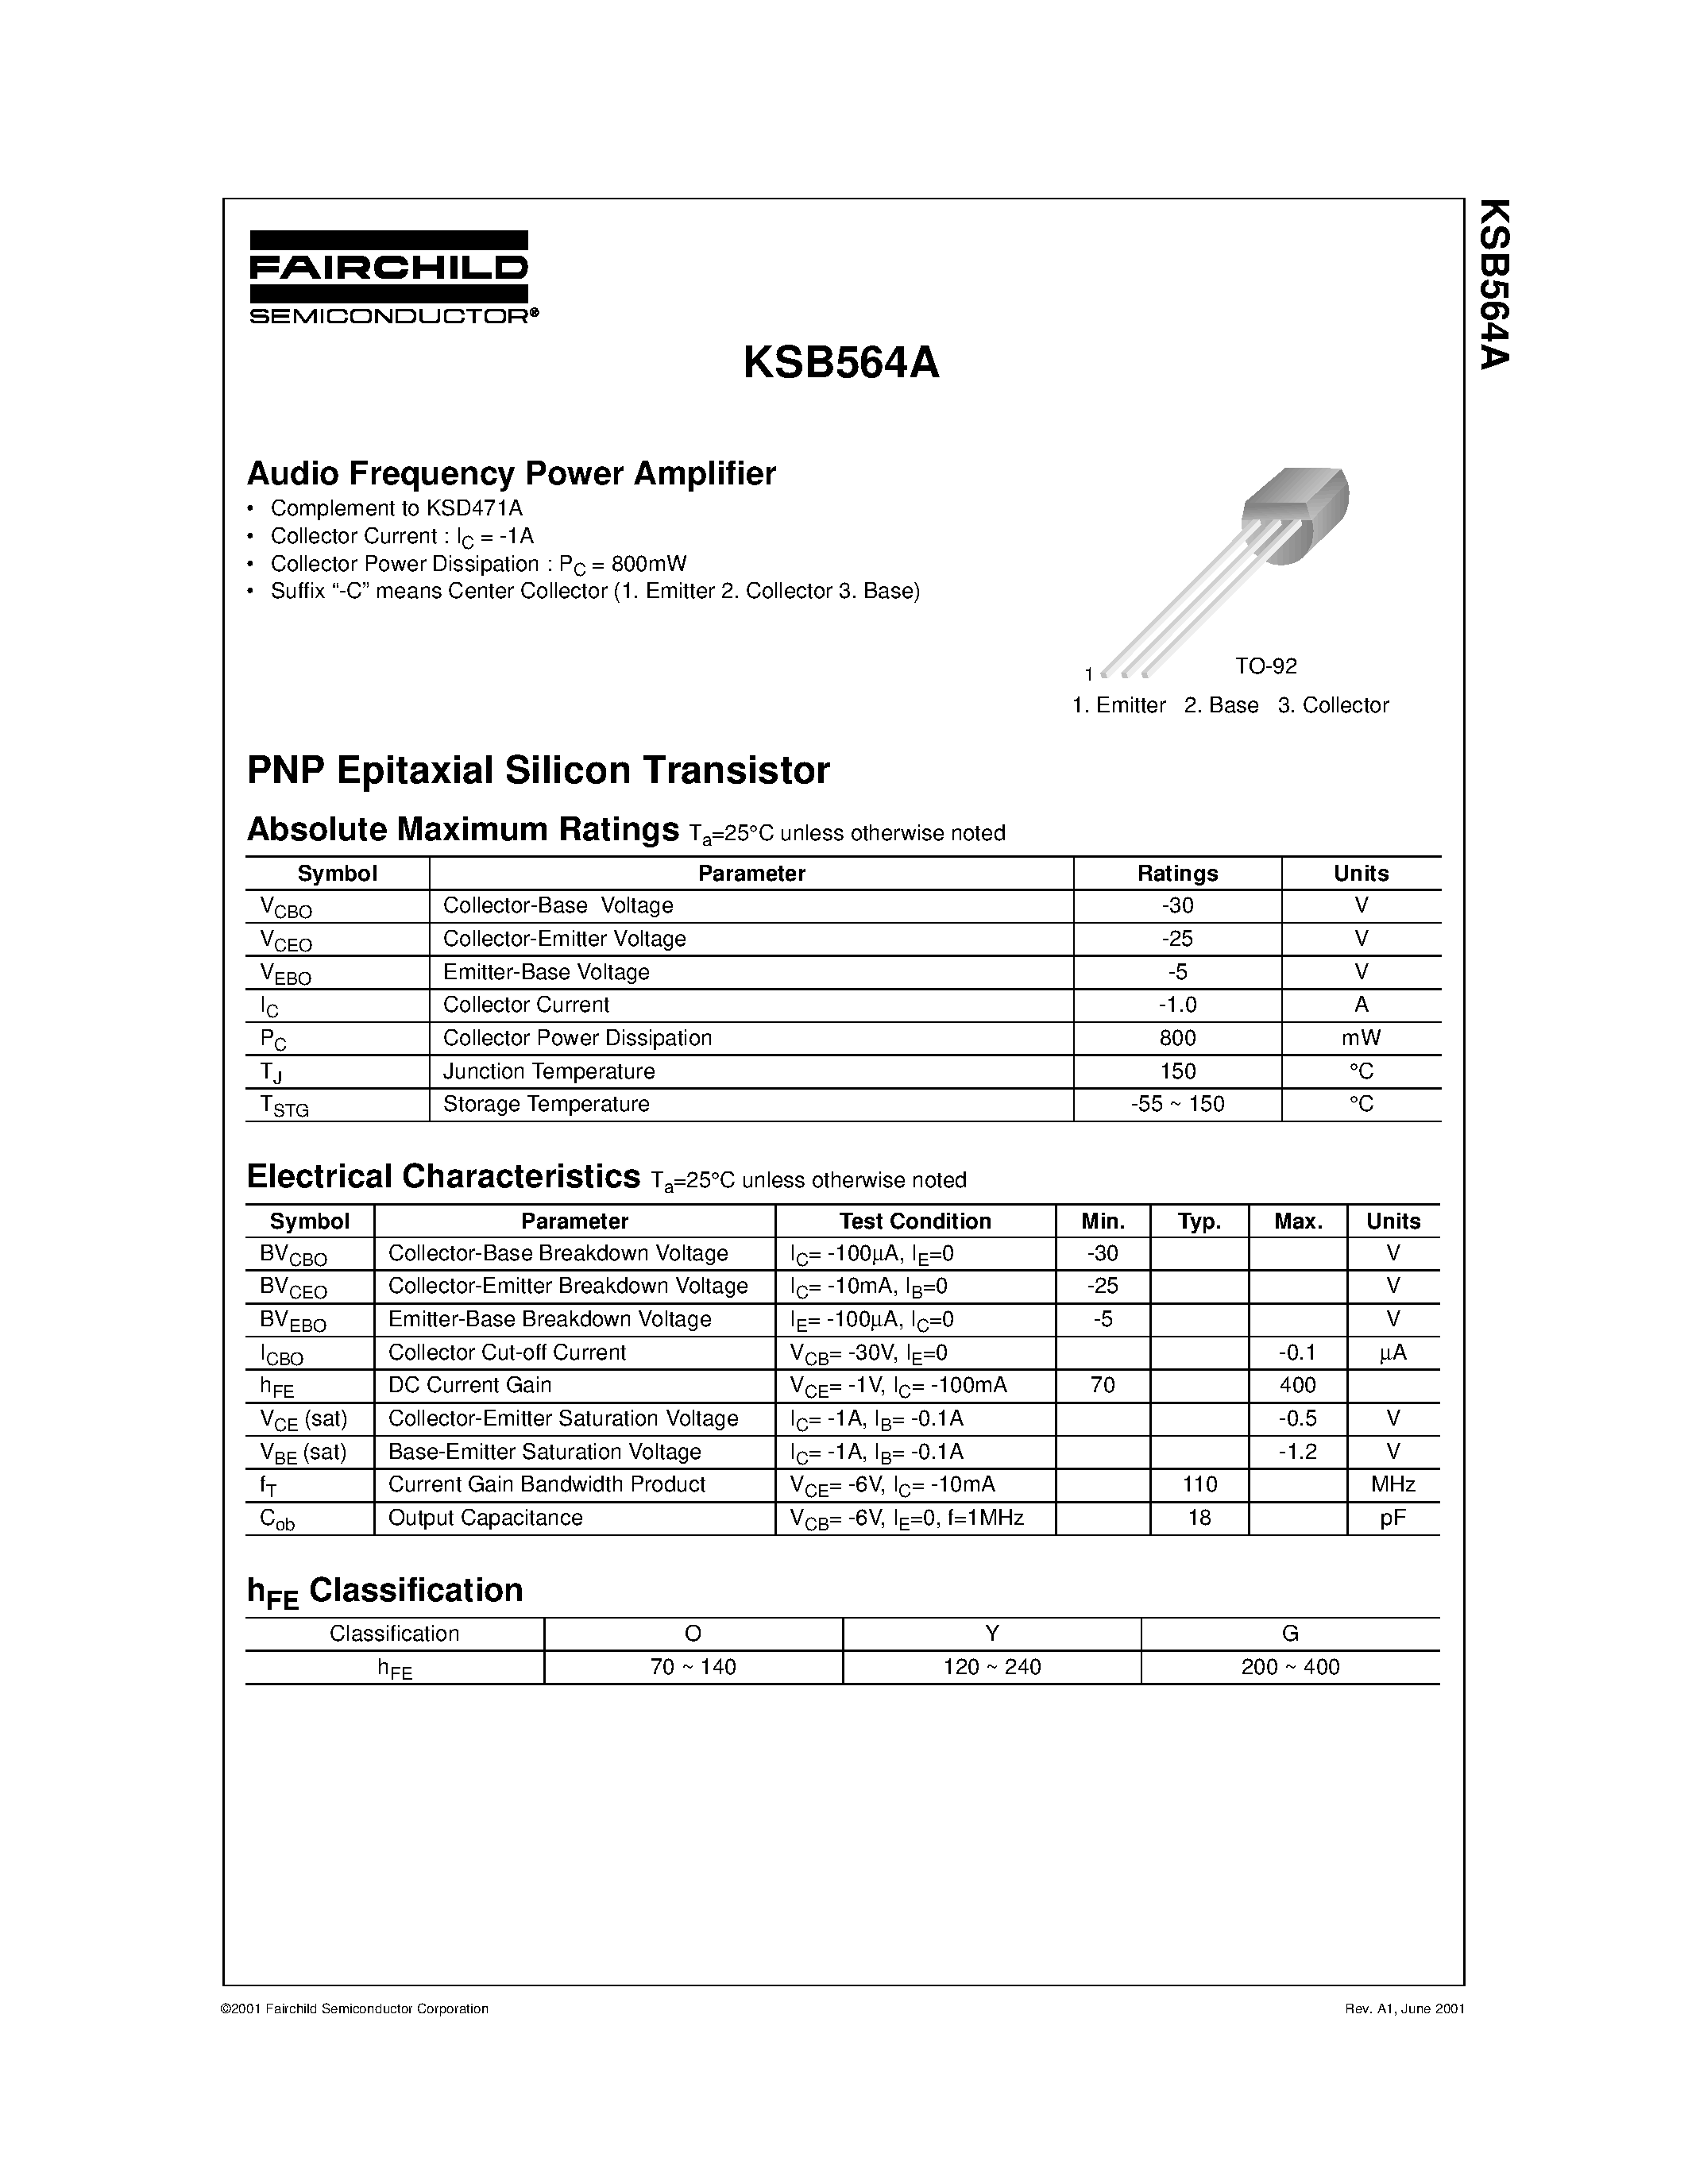 Даташит KSB564A - Audio Frequency Power Amplifier страница 1